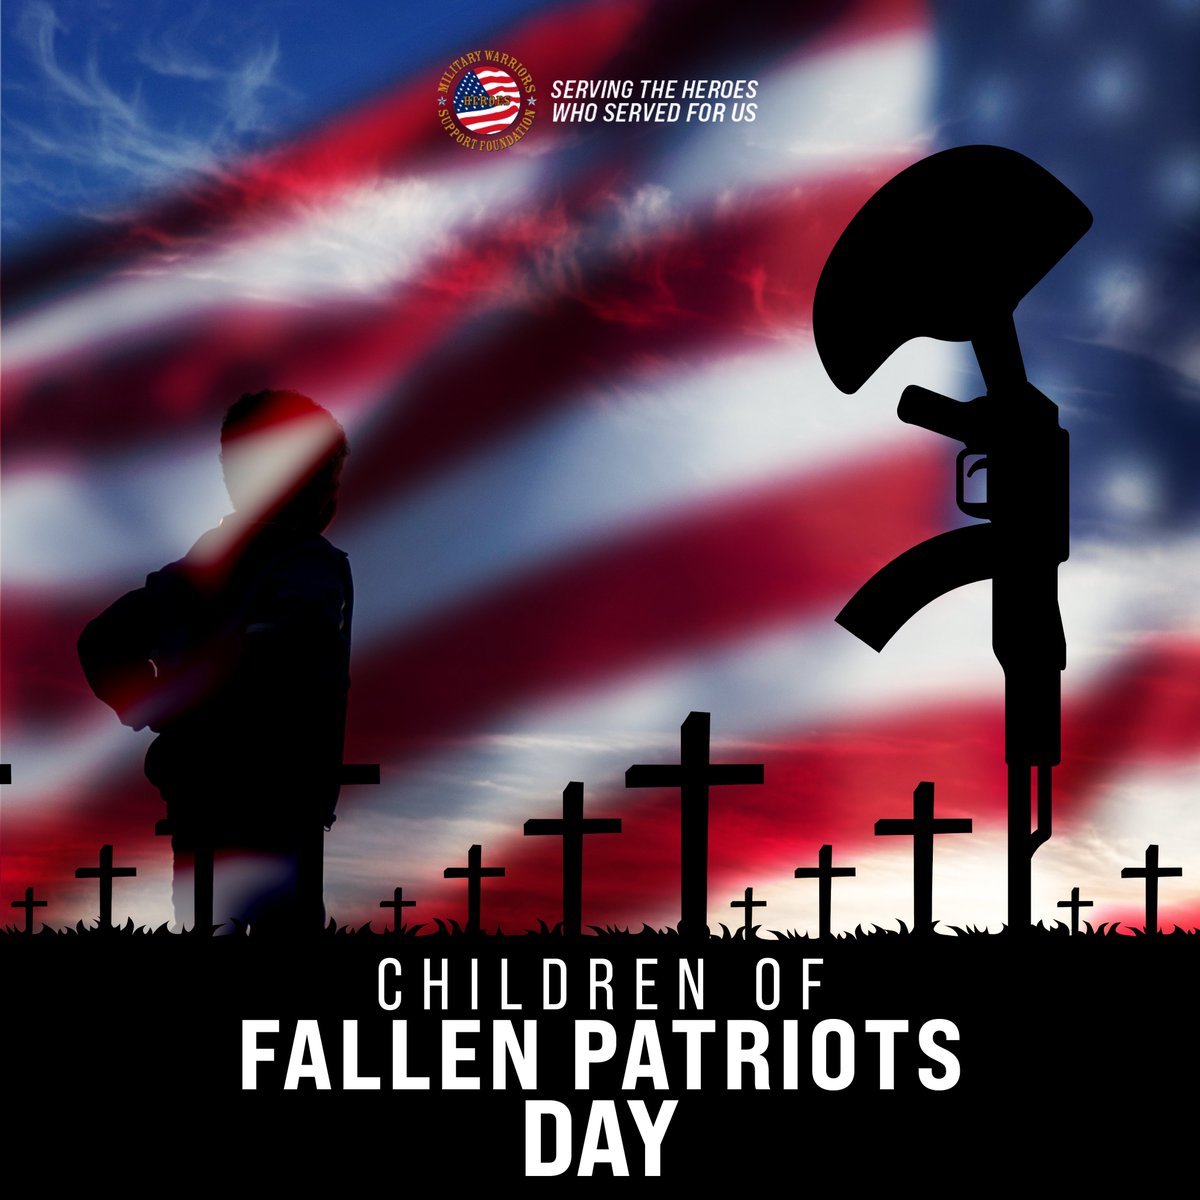 Today we honor and recognize the strength and resilience of children who have lost a parent in service to our nation. Together let's ensure that they have the resources and opportunities they need to thrive and pursue their dreams.  #ChildrenofFallenPatriotsDay #HelpingHeroes